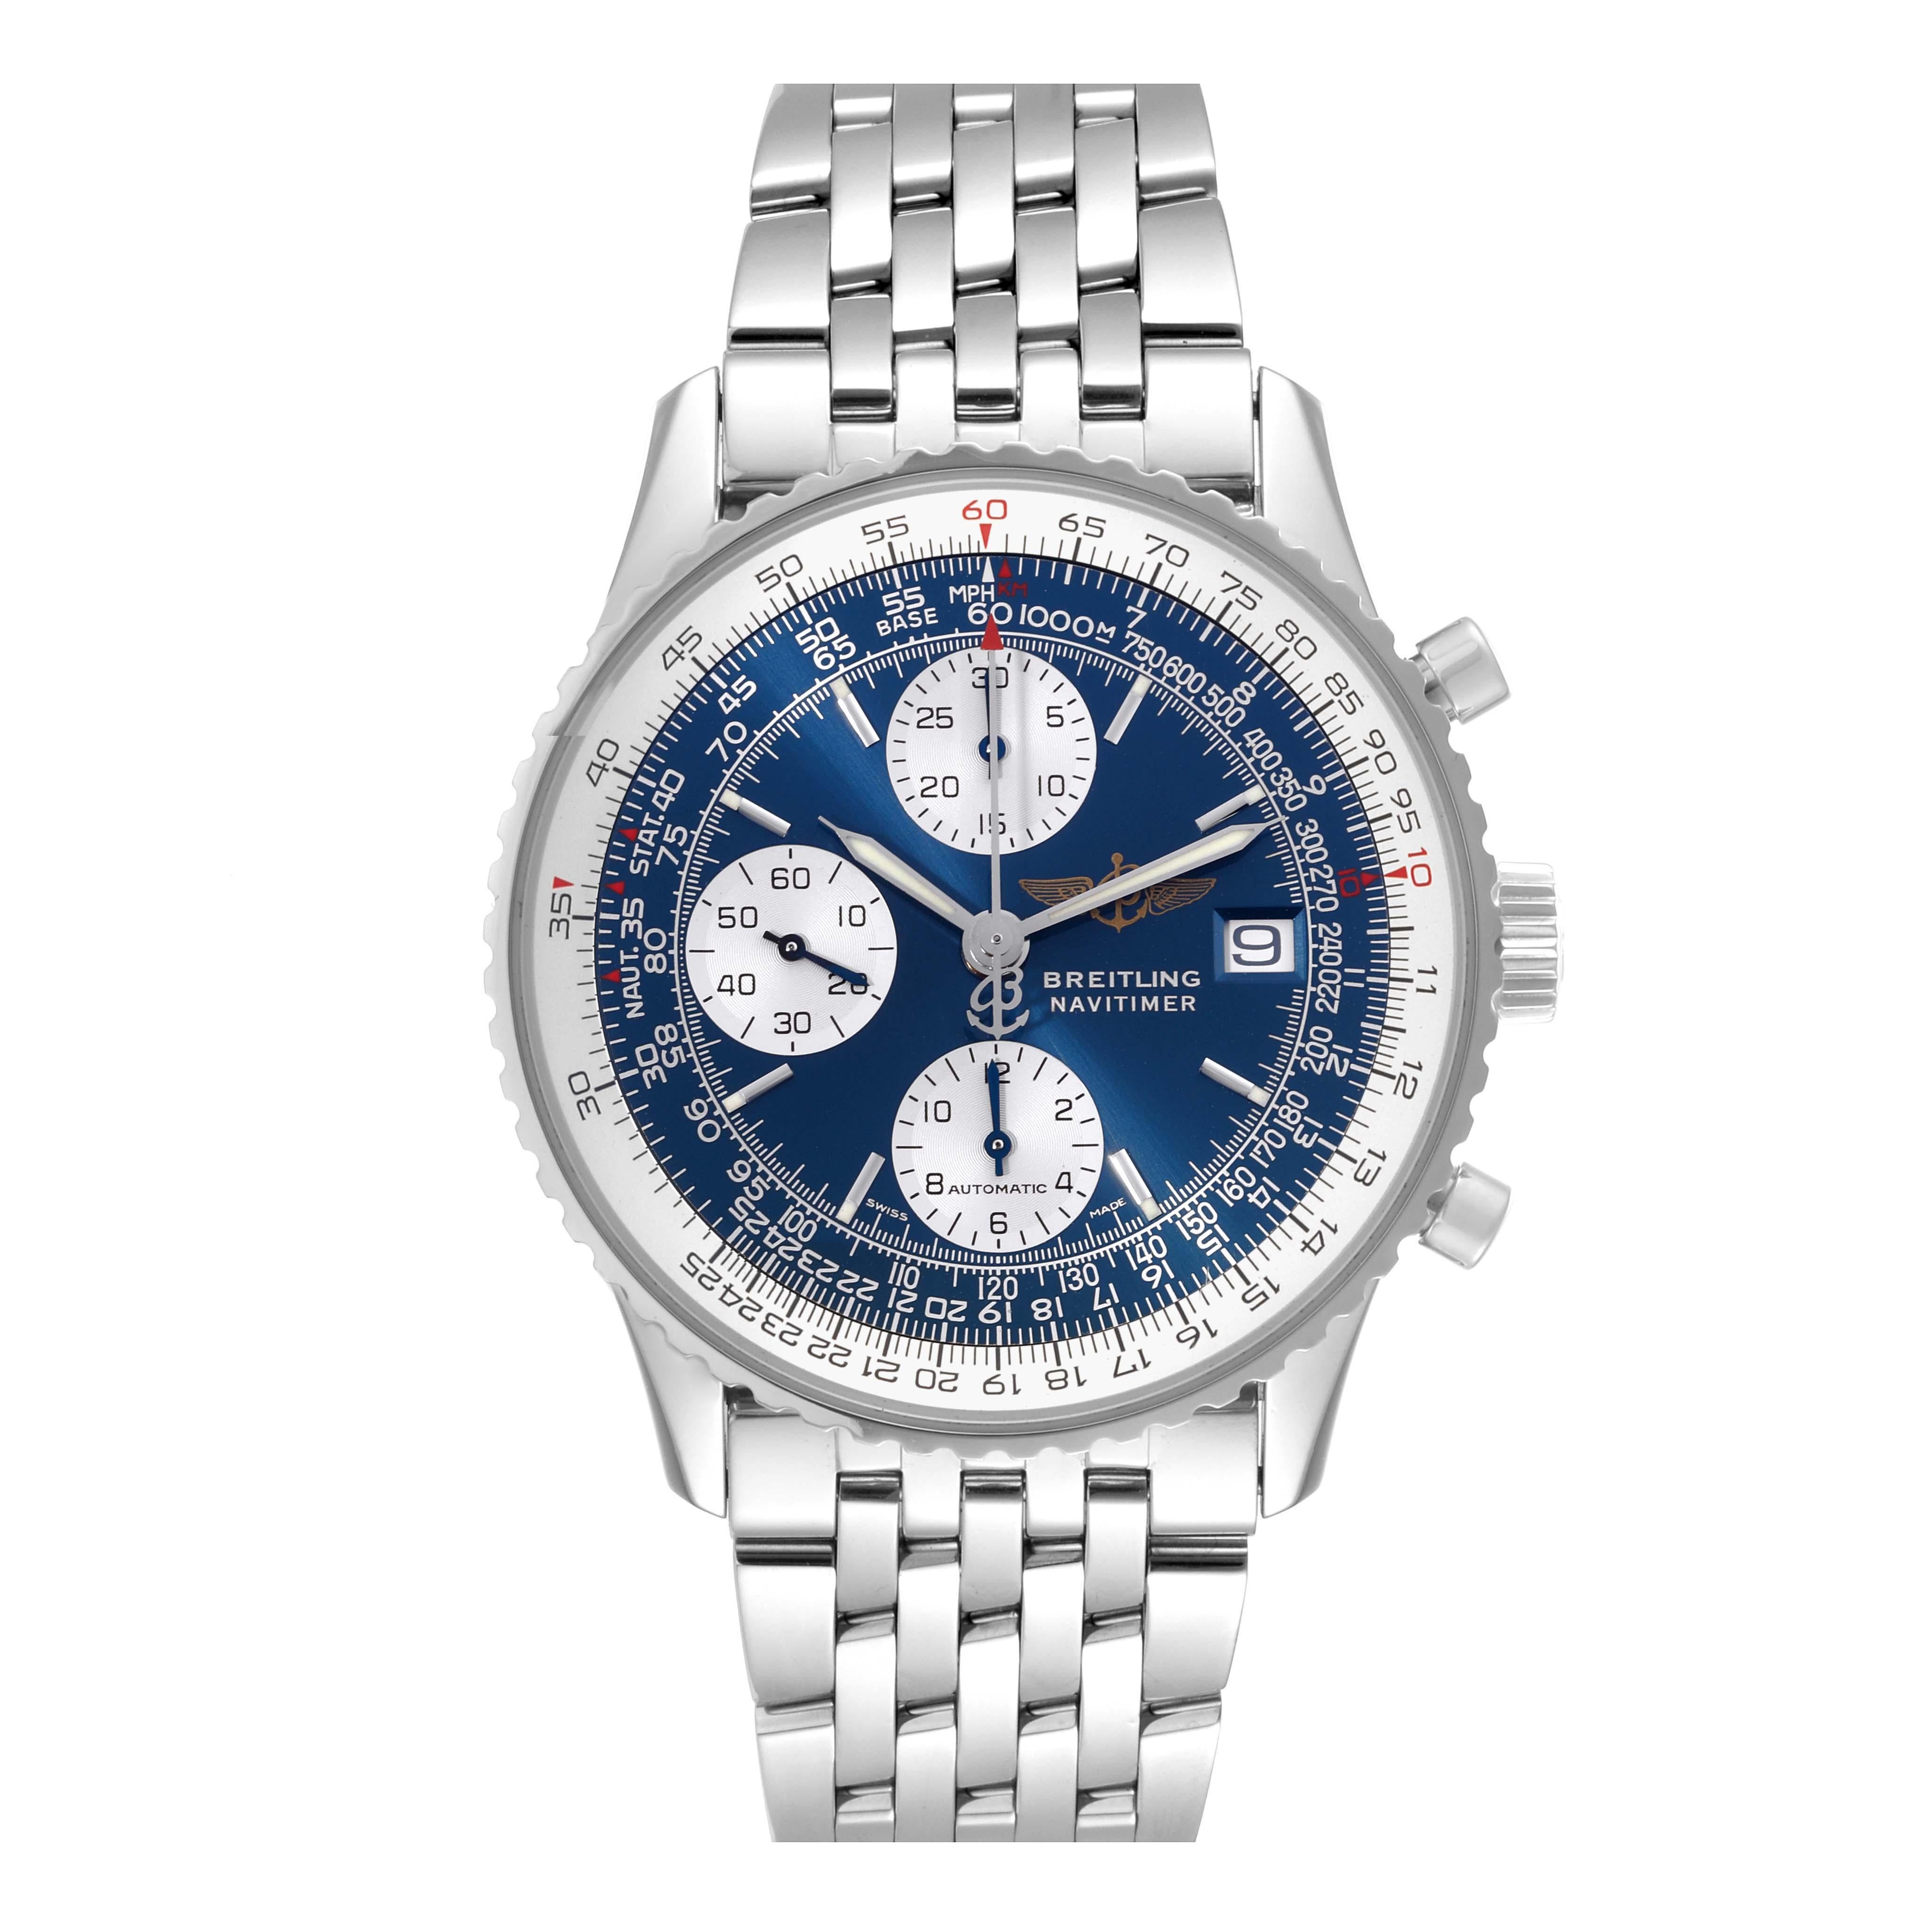 Breitling Navitimer II Blue Dial Chronograph Steel Mens Watch A13322 Box Papers. Officially certified chronometer self-winding automatic movement. Chronograph function. Stainless steel case 42 mm in diameter. Stainless steel screwed-down crown and